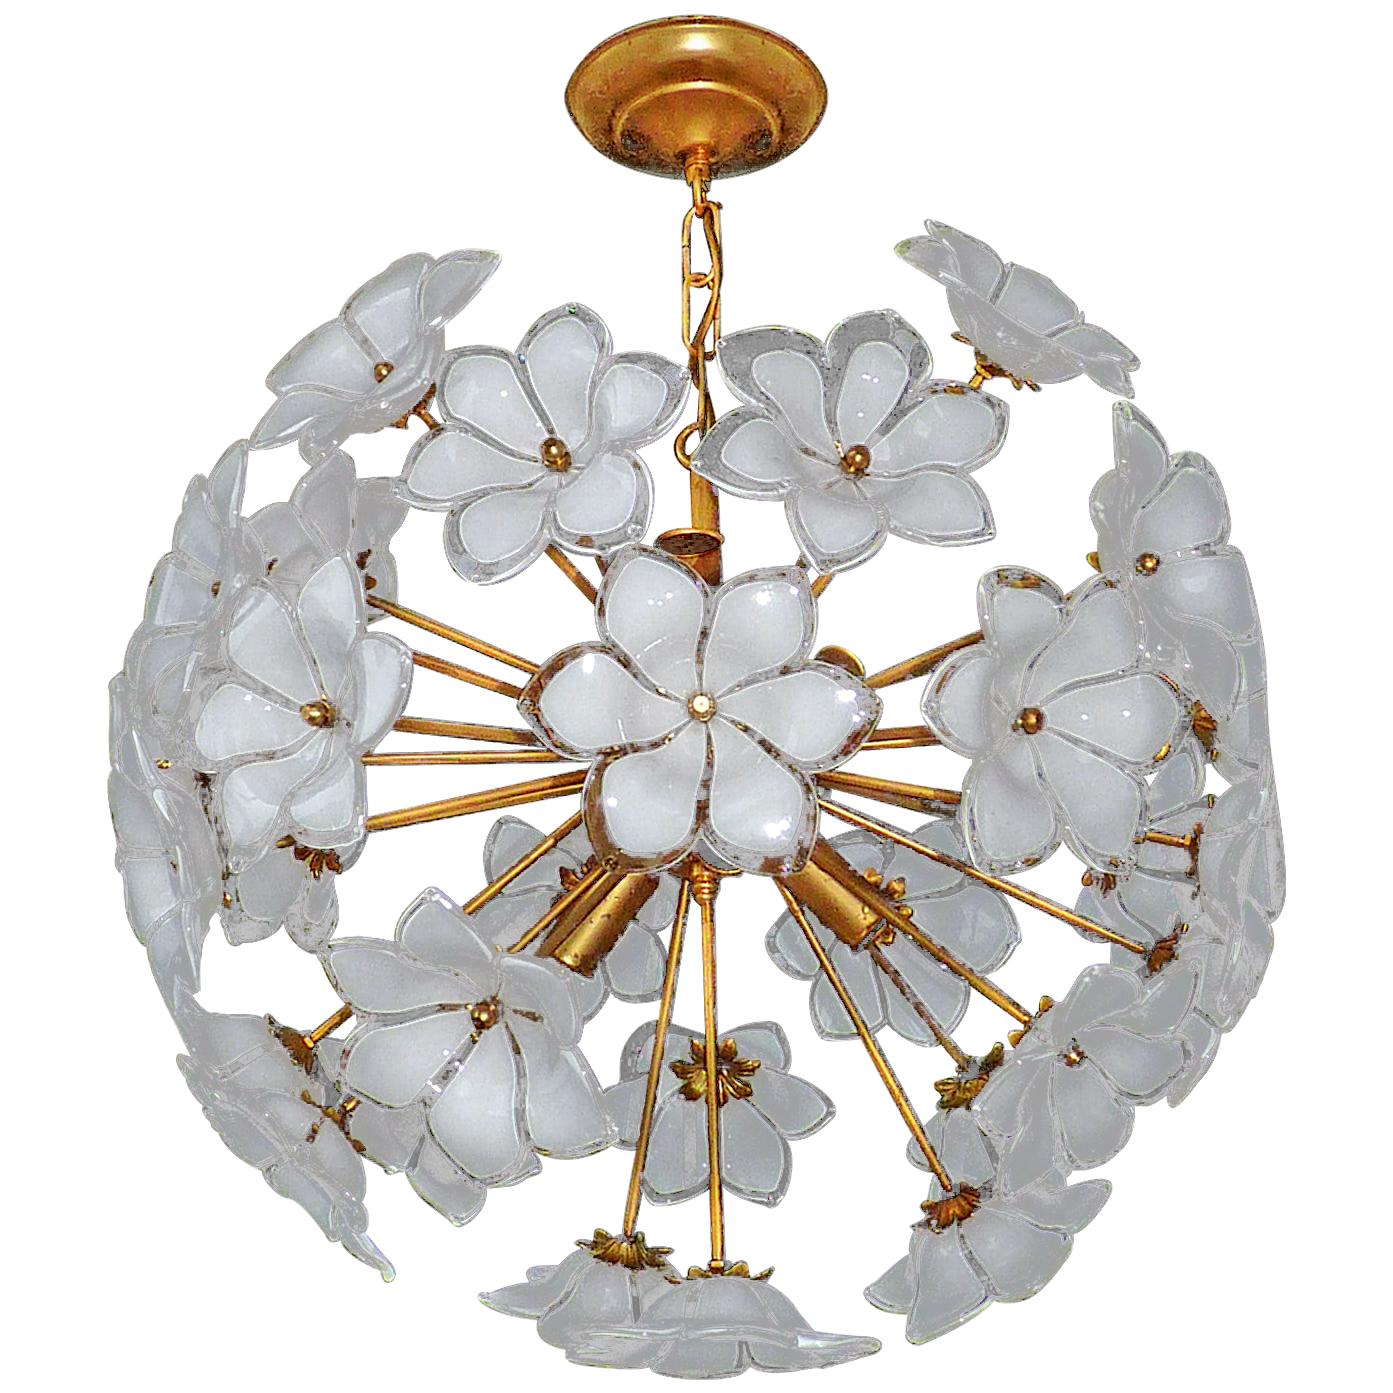 Vintage midcentury Italian Murano flower bouquet in the style of Venini. Art-glass with hand blown white and clear art glass flowers and gilt brass. Pair also available.
Measures:
Diameter 20 in/ 50 cm
Height 27.5 in (chain=70 cm
Weight 16 lb/7 Kg
6